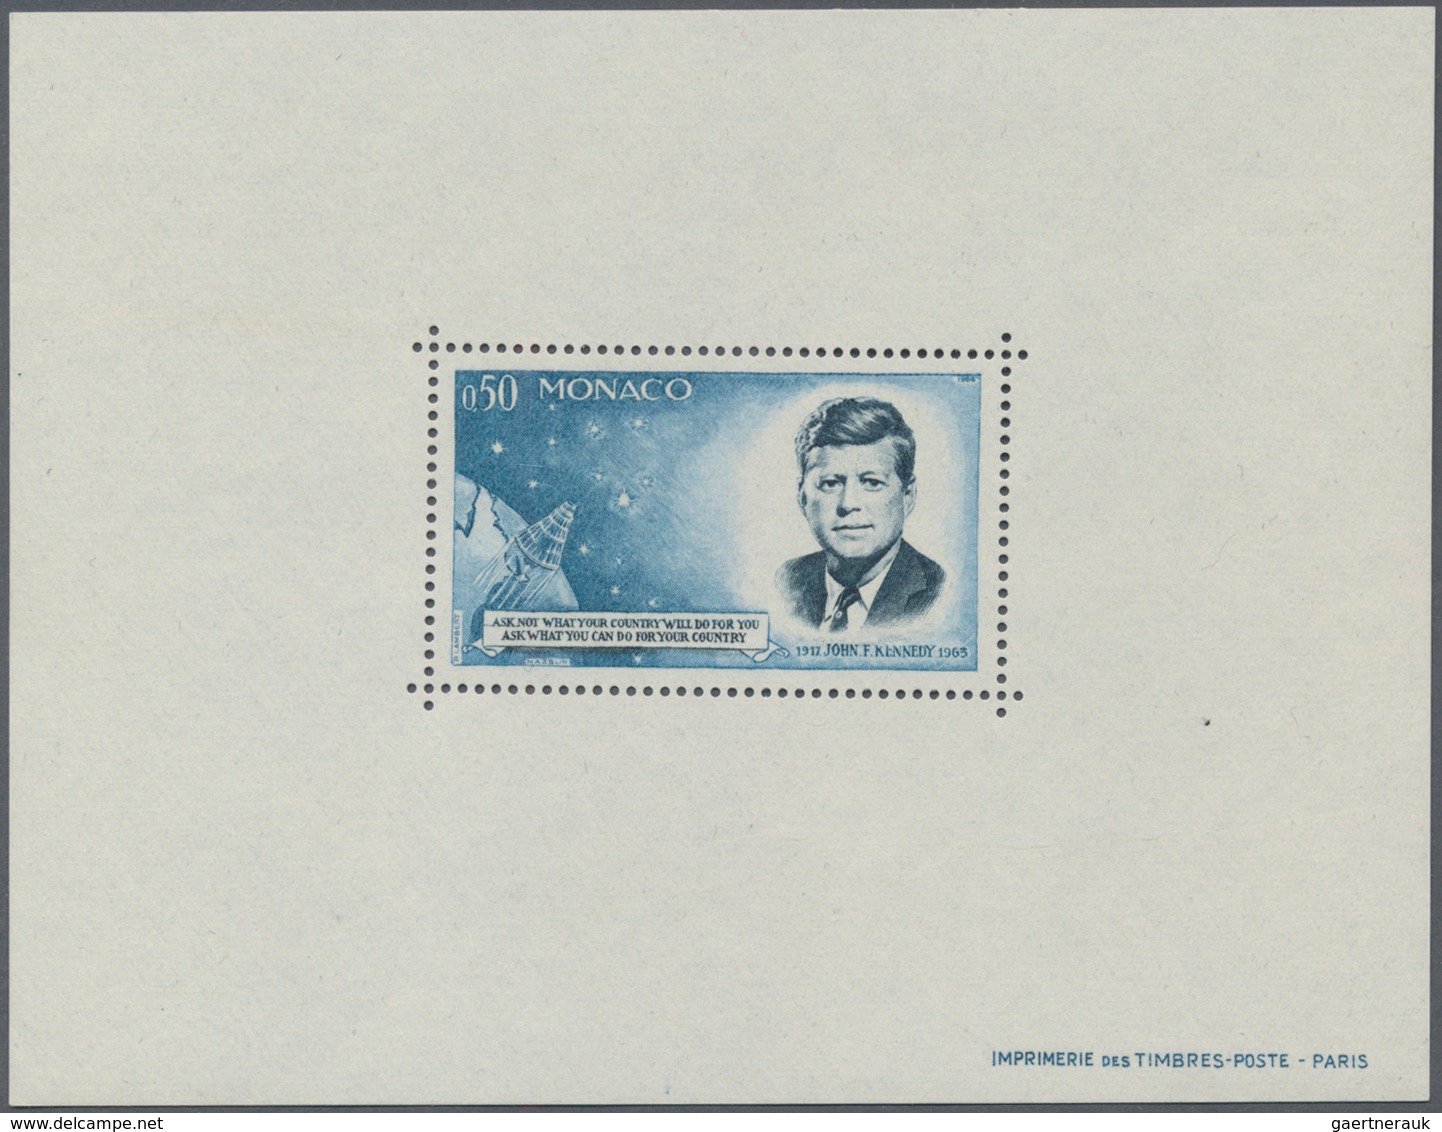 Monaco: 1964, J. F. Kennedy And Mercury Capsule, SPECIAL SOUVENIR SHEET Perforated, Three Copies Min - Unused Stamps